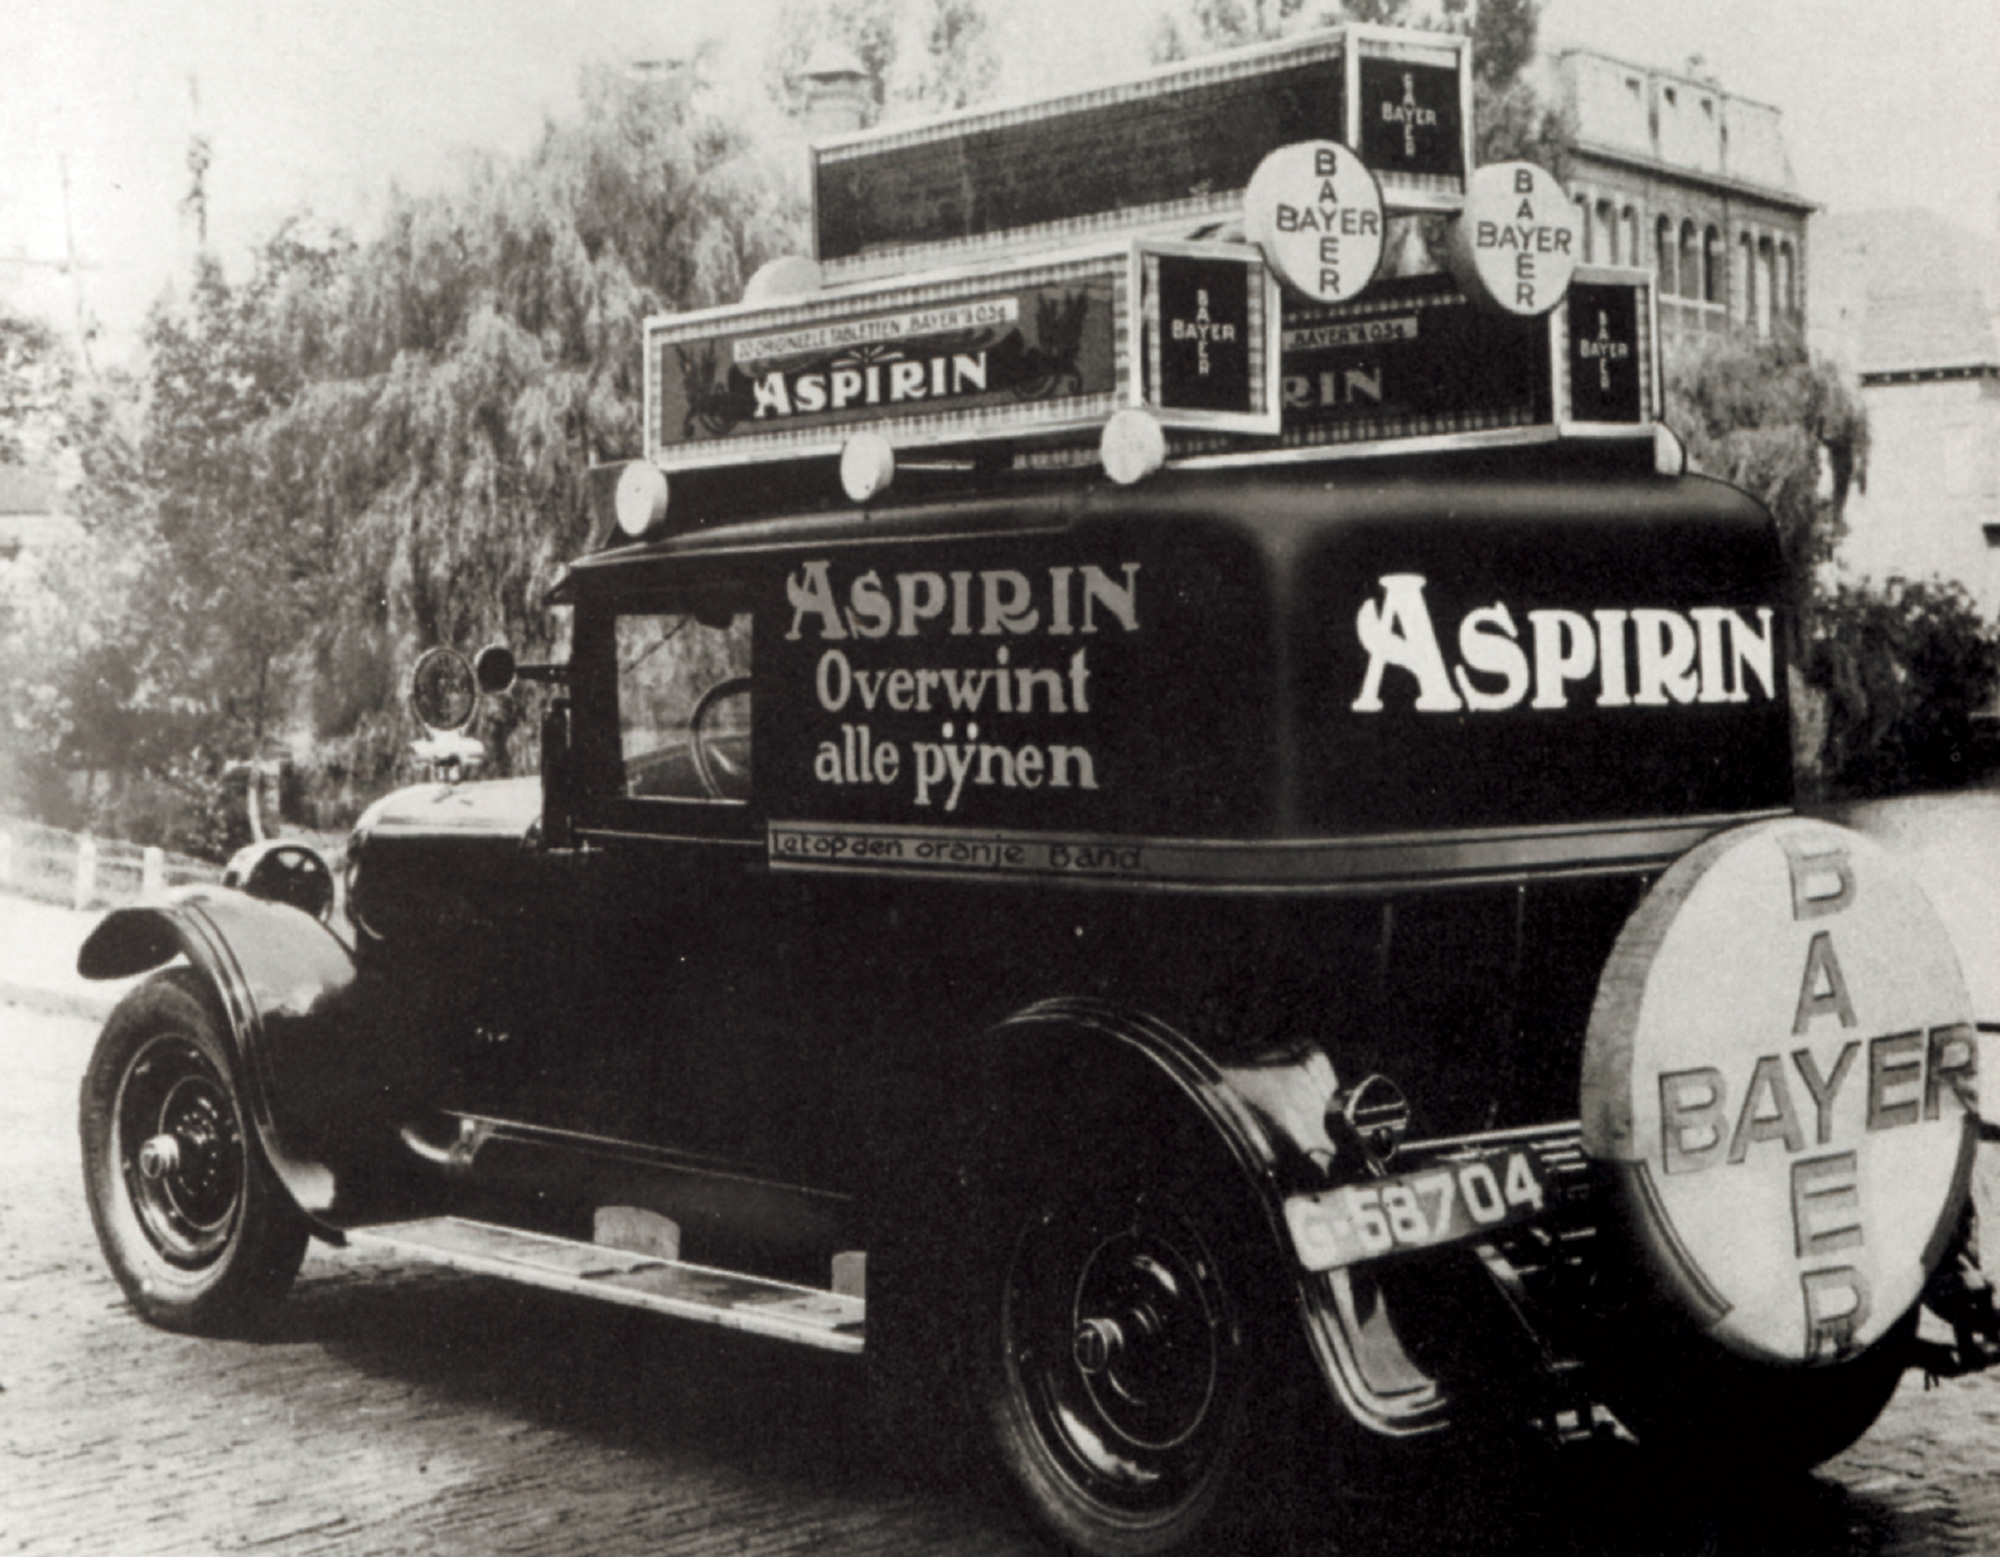 A photograph of an aspirin advertising truck, which became a familiar sight on European streets in the 1920s and 1930s, with the explosion of aspirin advertising.